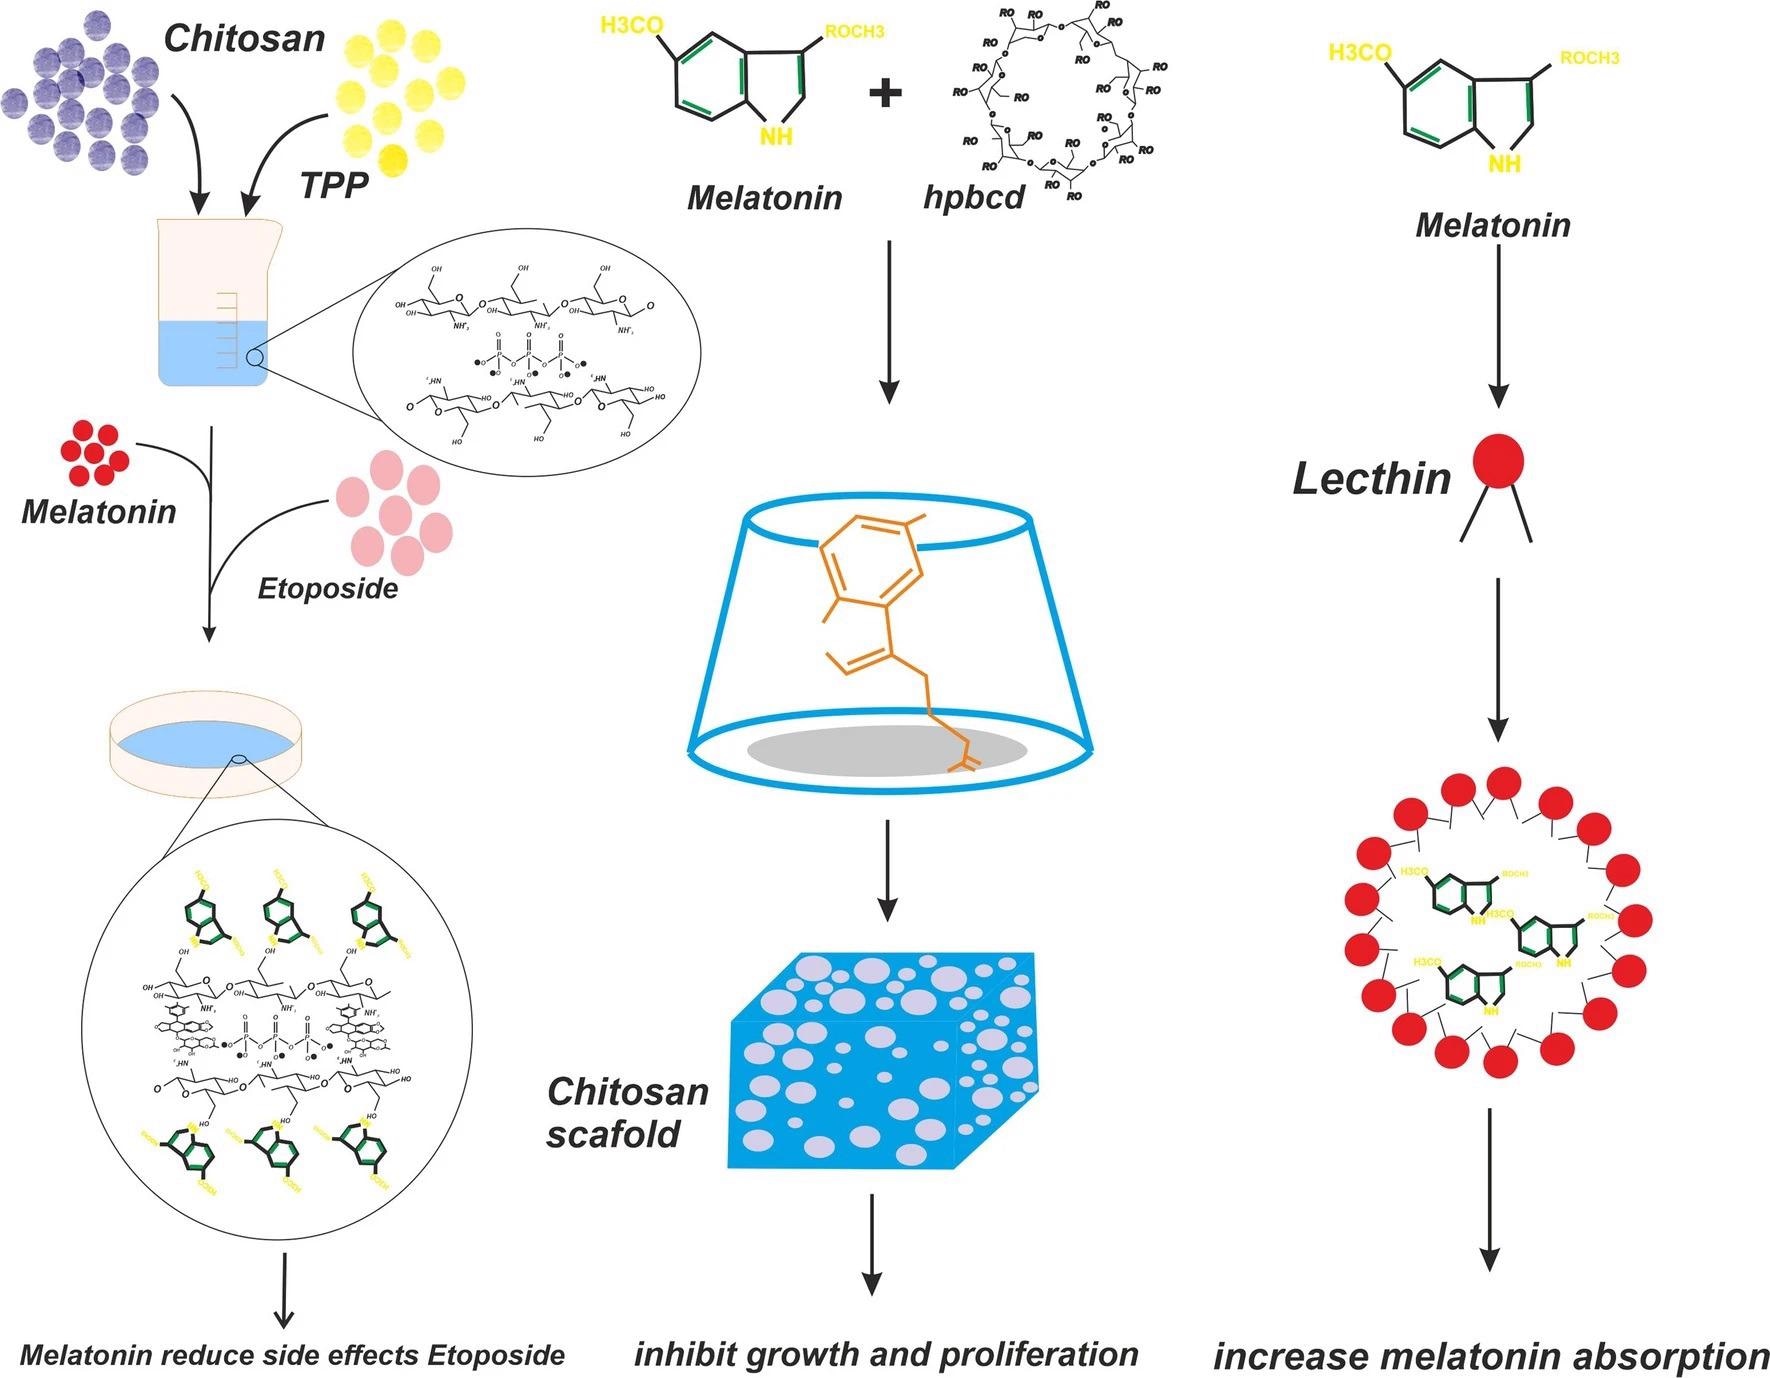 The schematic diagram provided reveals chitosan melatonin nanostructures and its functions